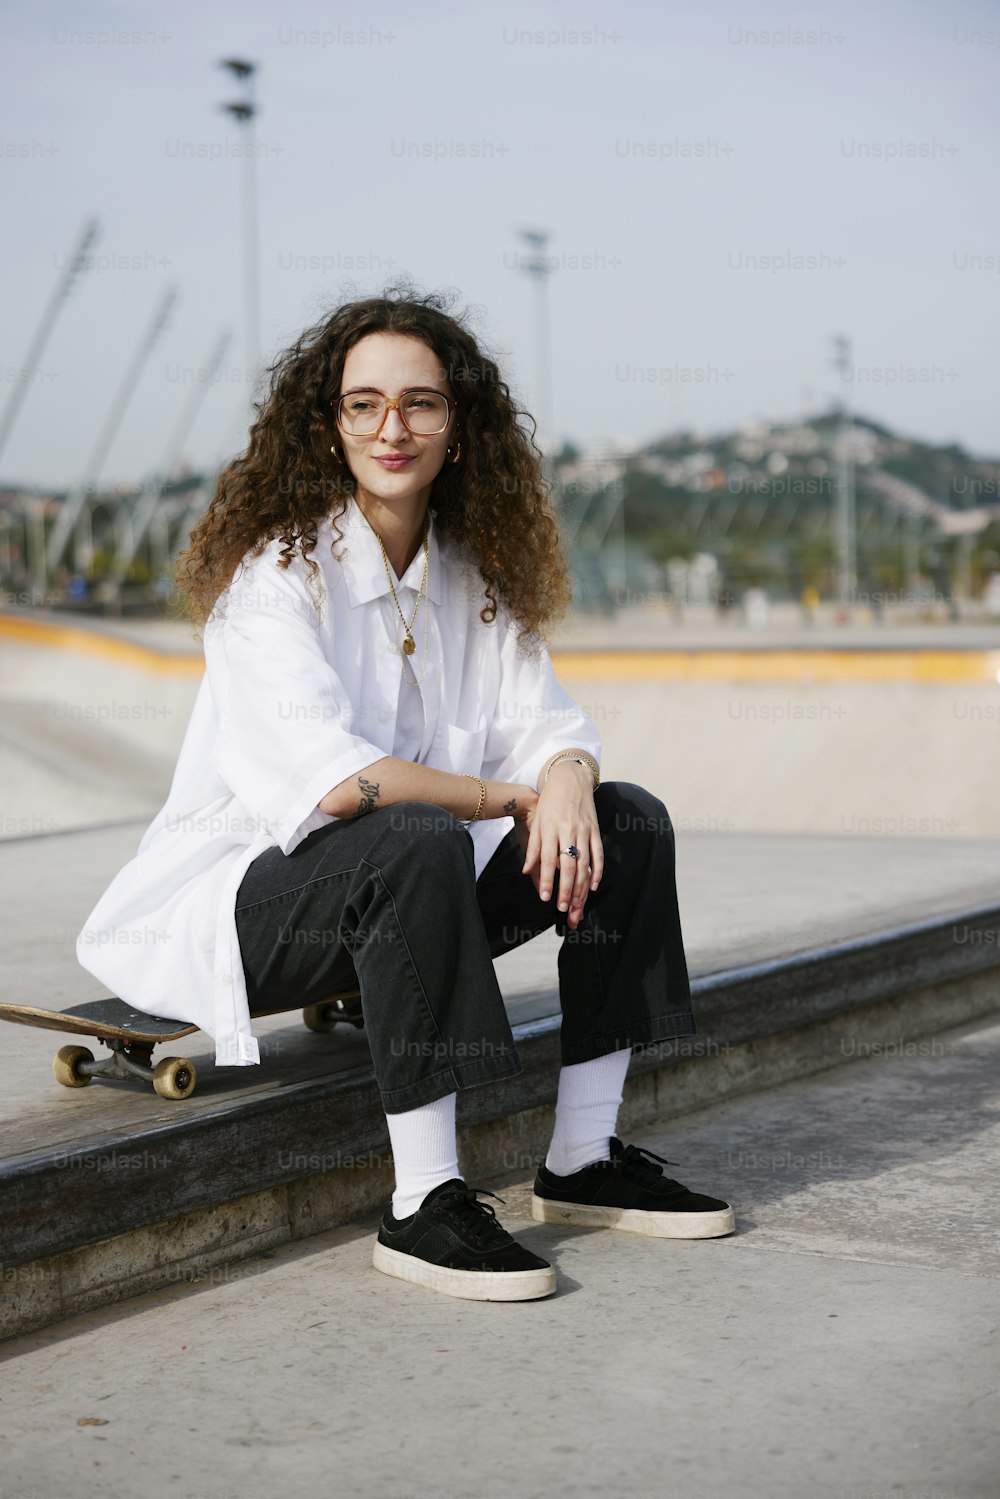 a woman sitting on a ledge with a skateboard